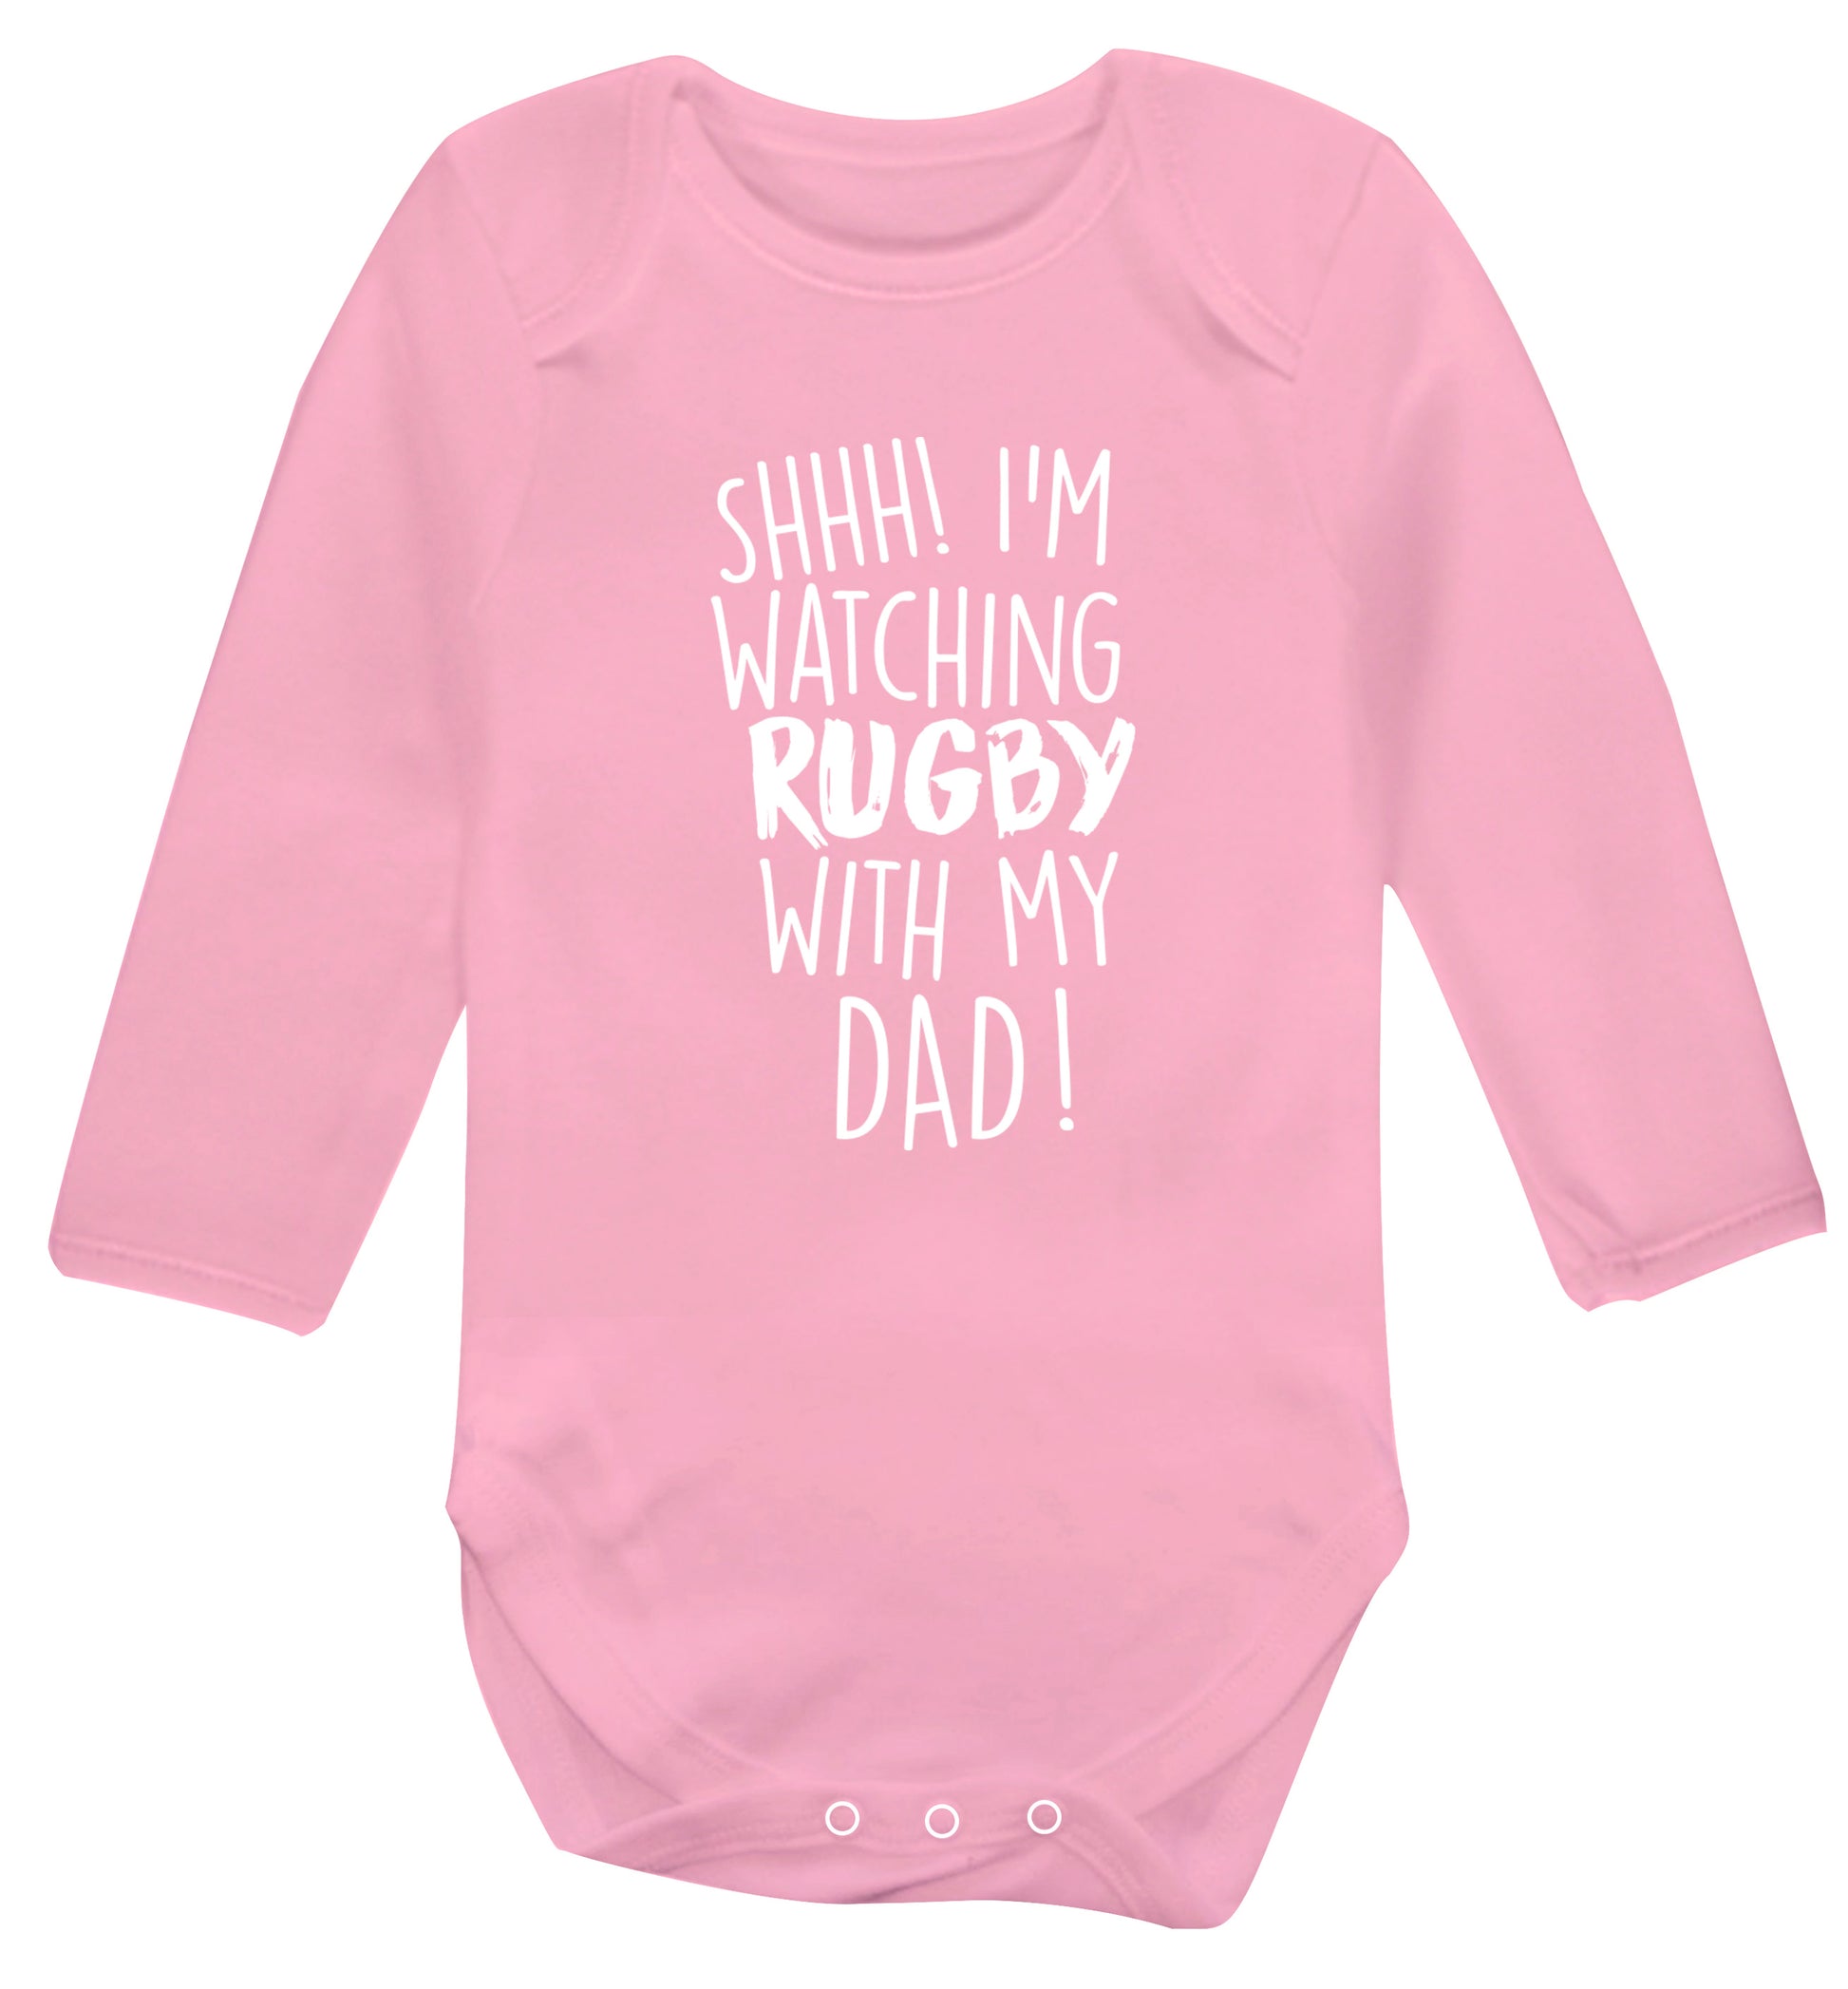 Shh... I'm watching rugby with my dad Baby Vest long sleeved pale pink 6-12 months